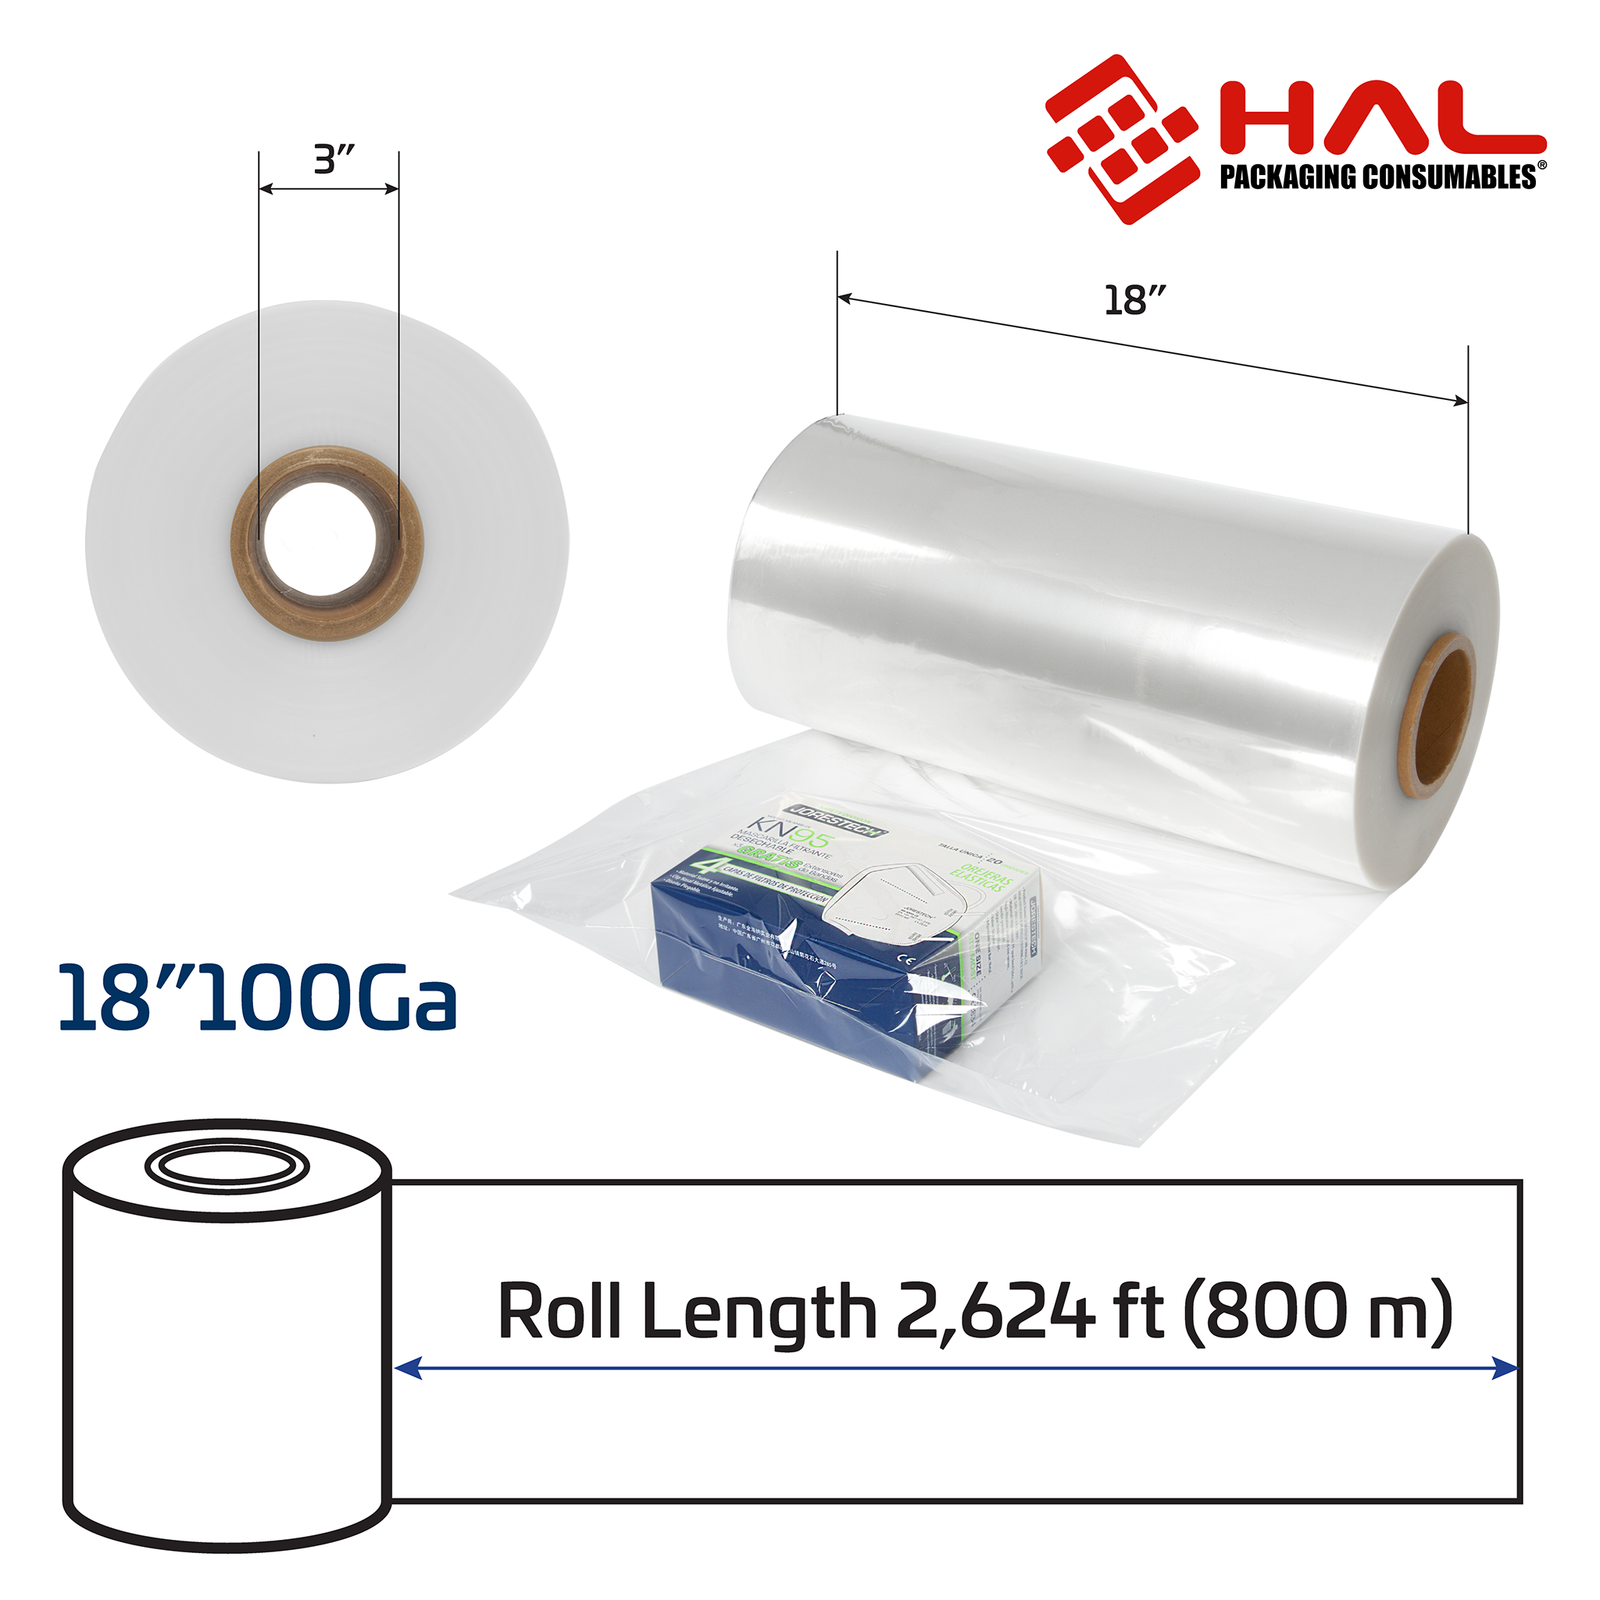 Measurements of the 100 gauge shrink wrapping film tube. 3 inch diameter of the inner core, and 18 inch width with a 2,624 ft. length (800 meters).